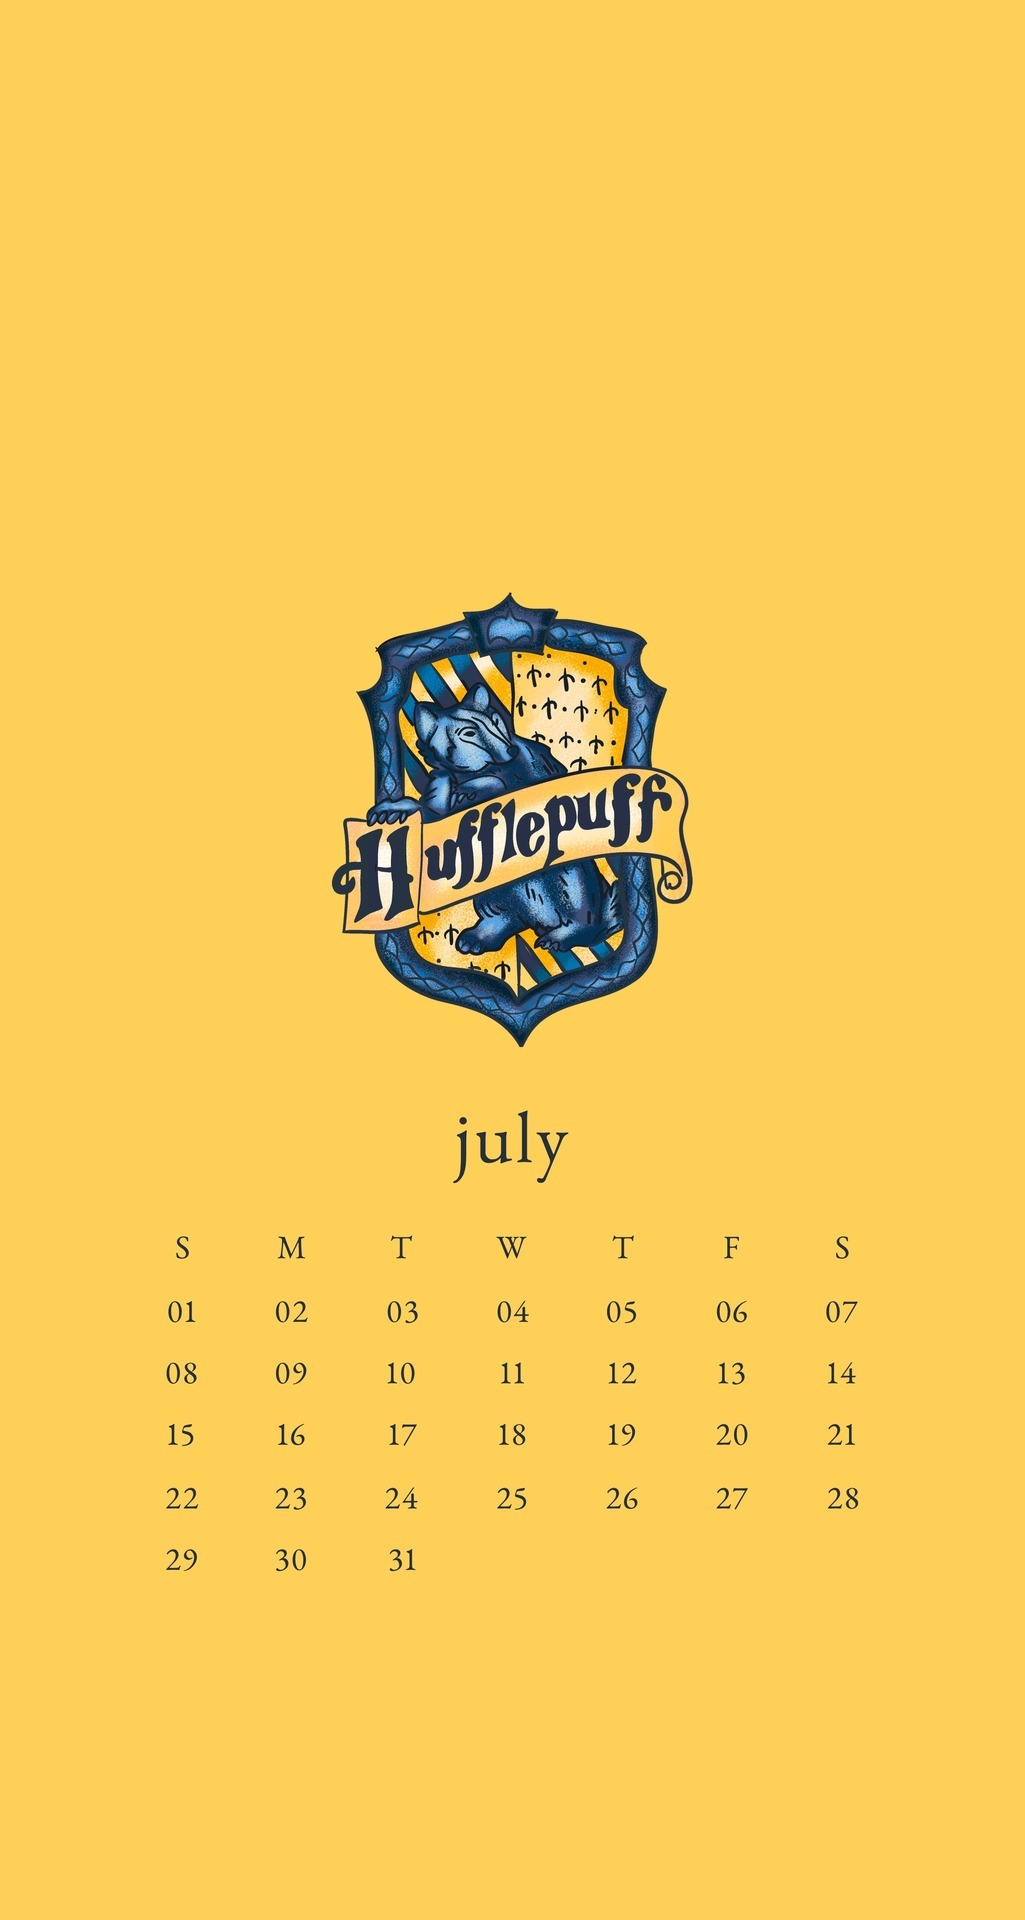 Emma S Studyblr July Hogwarts House Phone Wallpapers Here Are Four Hogwarts hufflepuff phone wallpapers feel free to use these hogwarts hufflepuff phone images as a background for your pc, laptop, android phone, iphone or tablet. july hogwarts house phone wallpapers